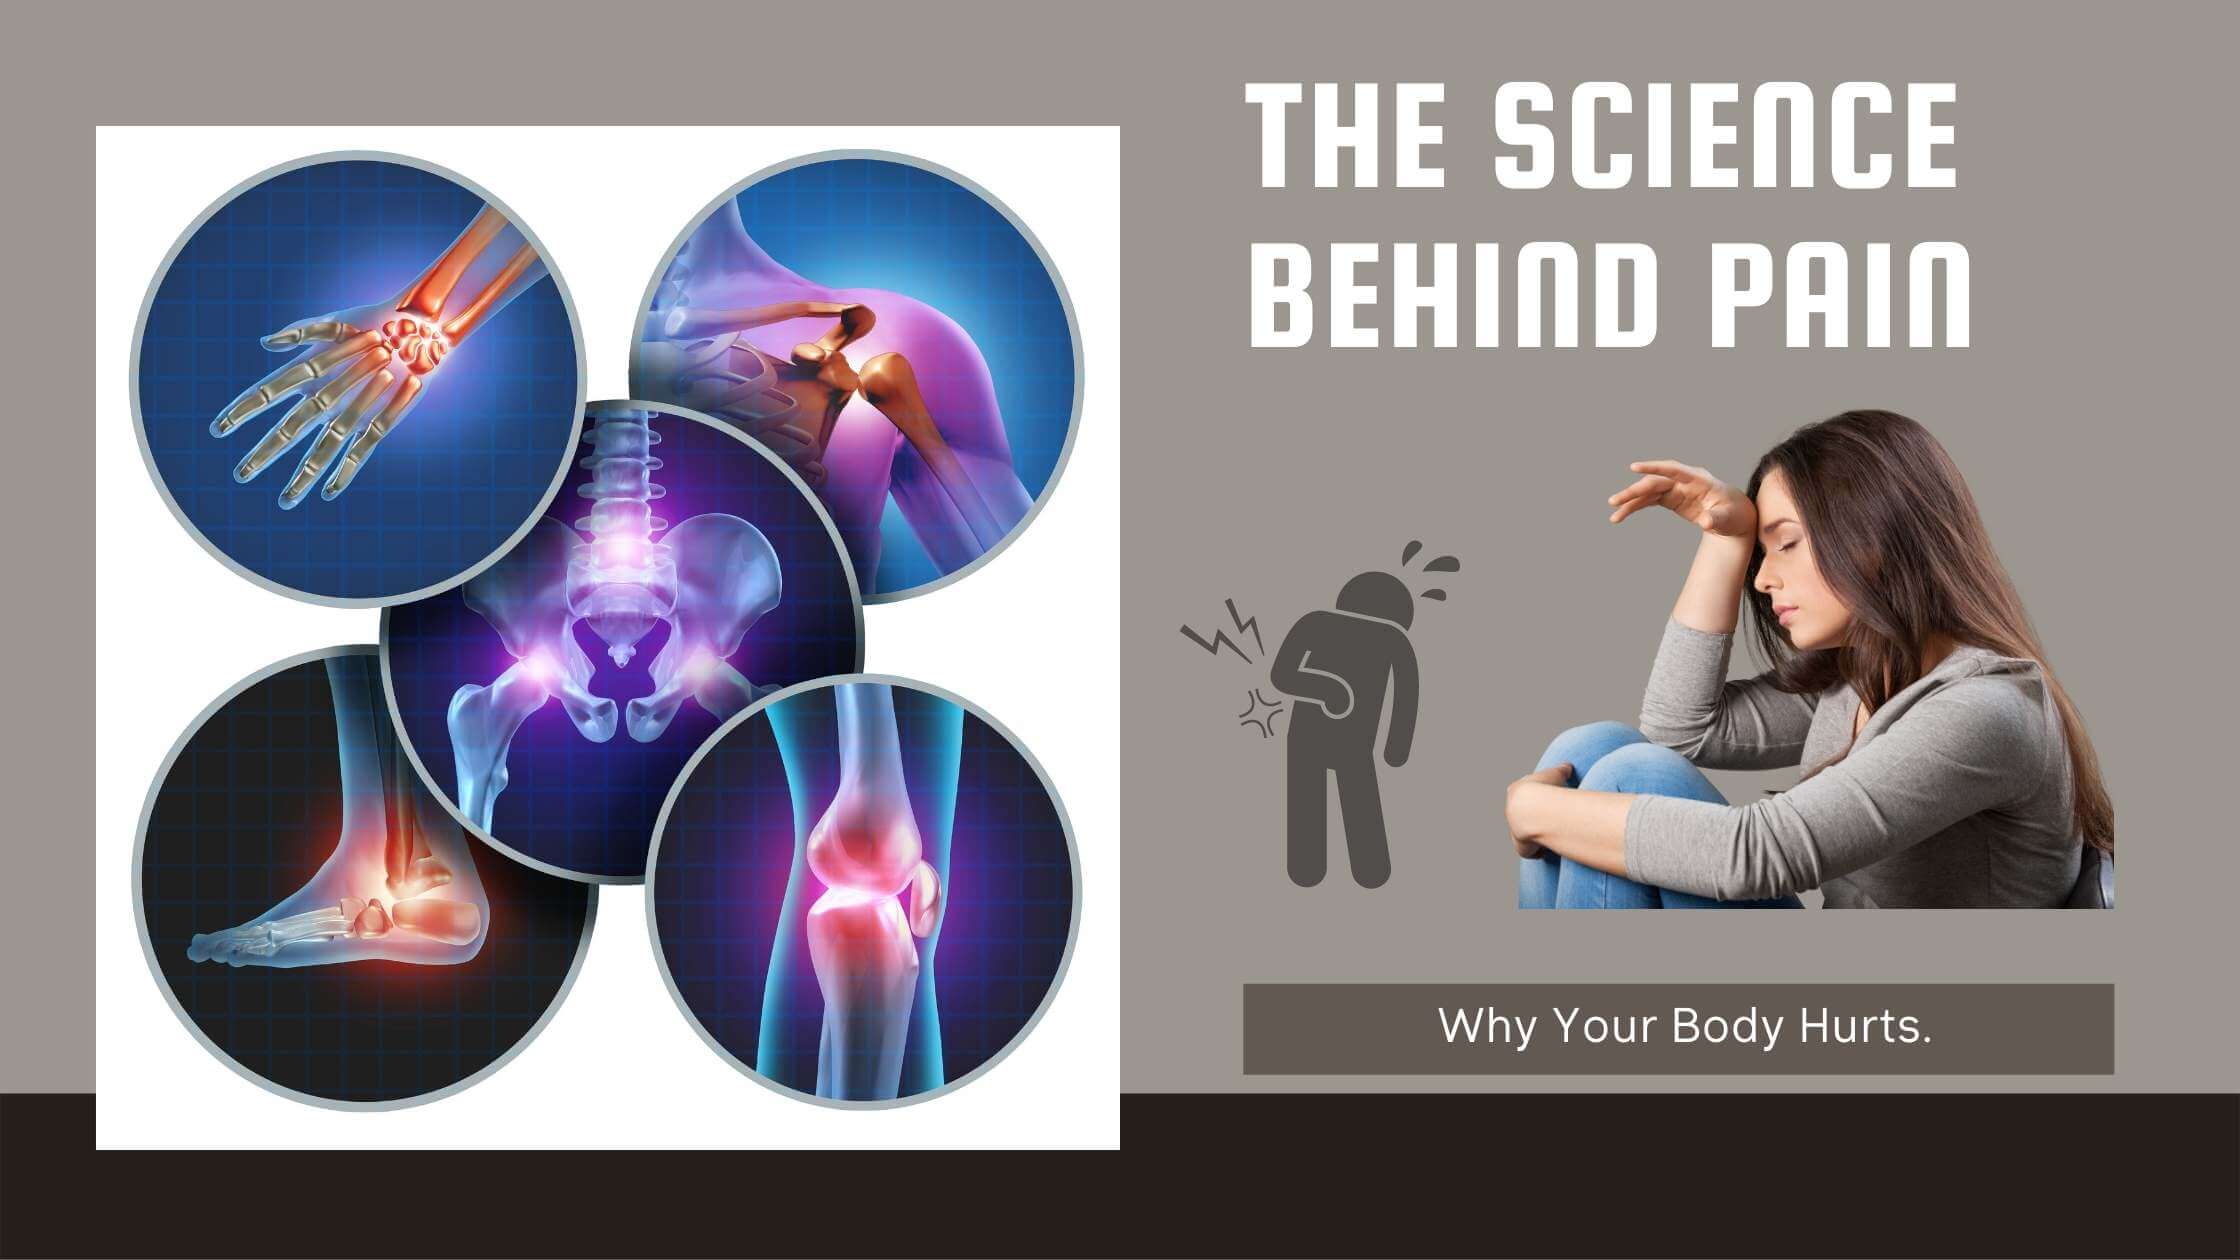 The Science Behind Pain: Why Your Body Hurts.